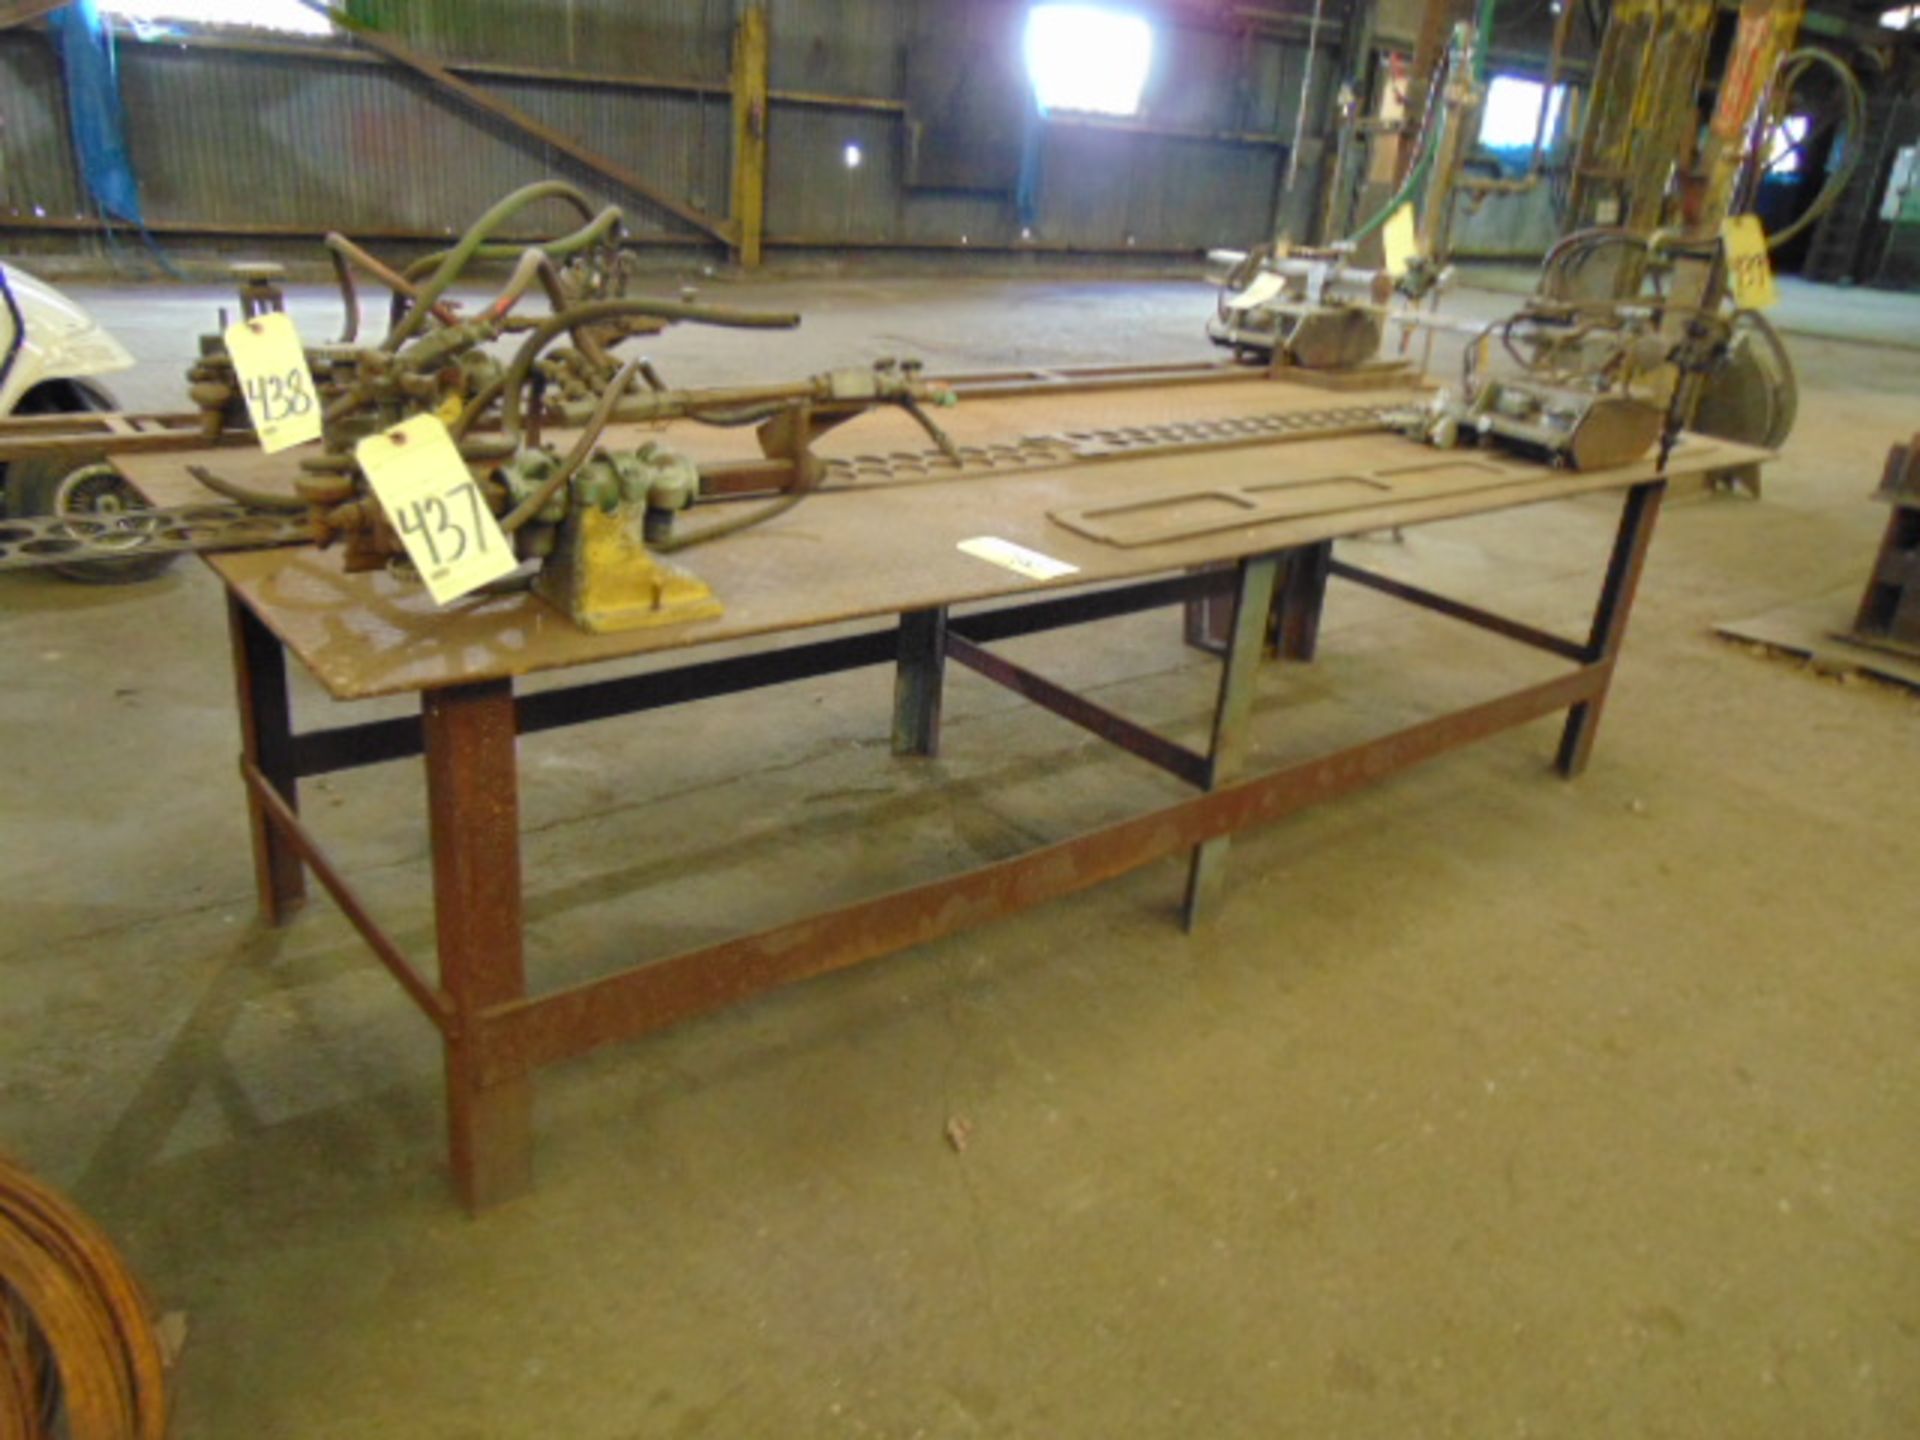 STEEL TABLE, 48" W. X 120" L. (Note: cannot be removed until empty)